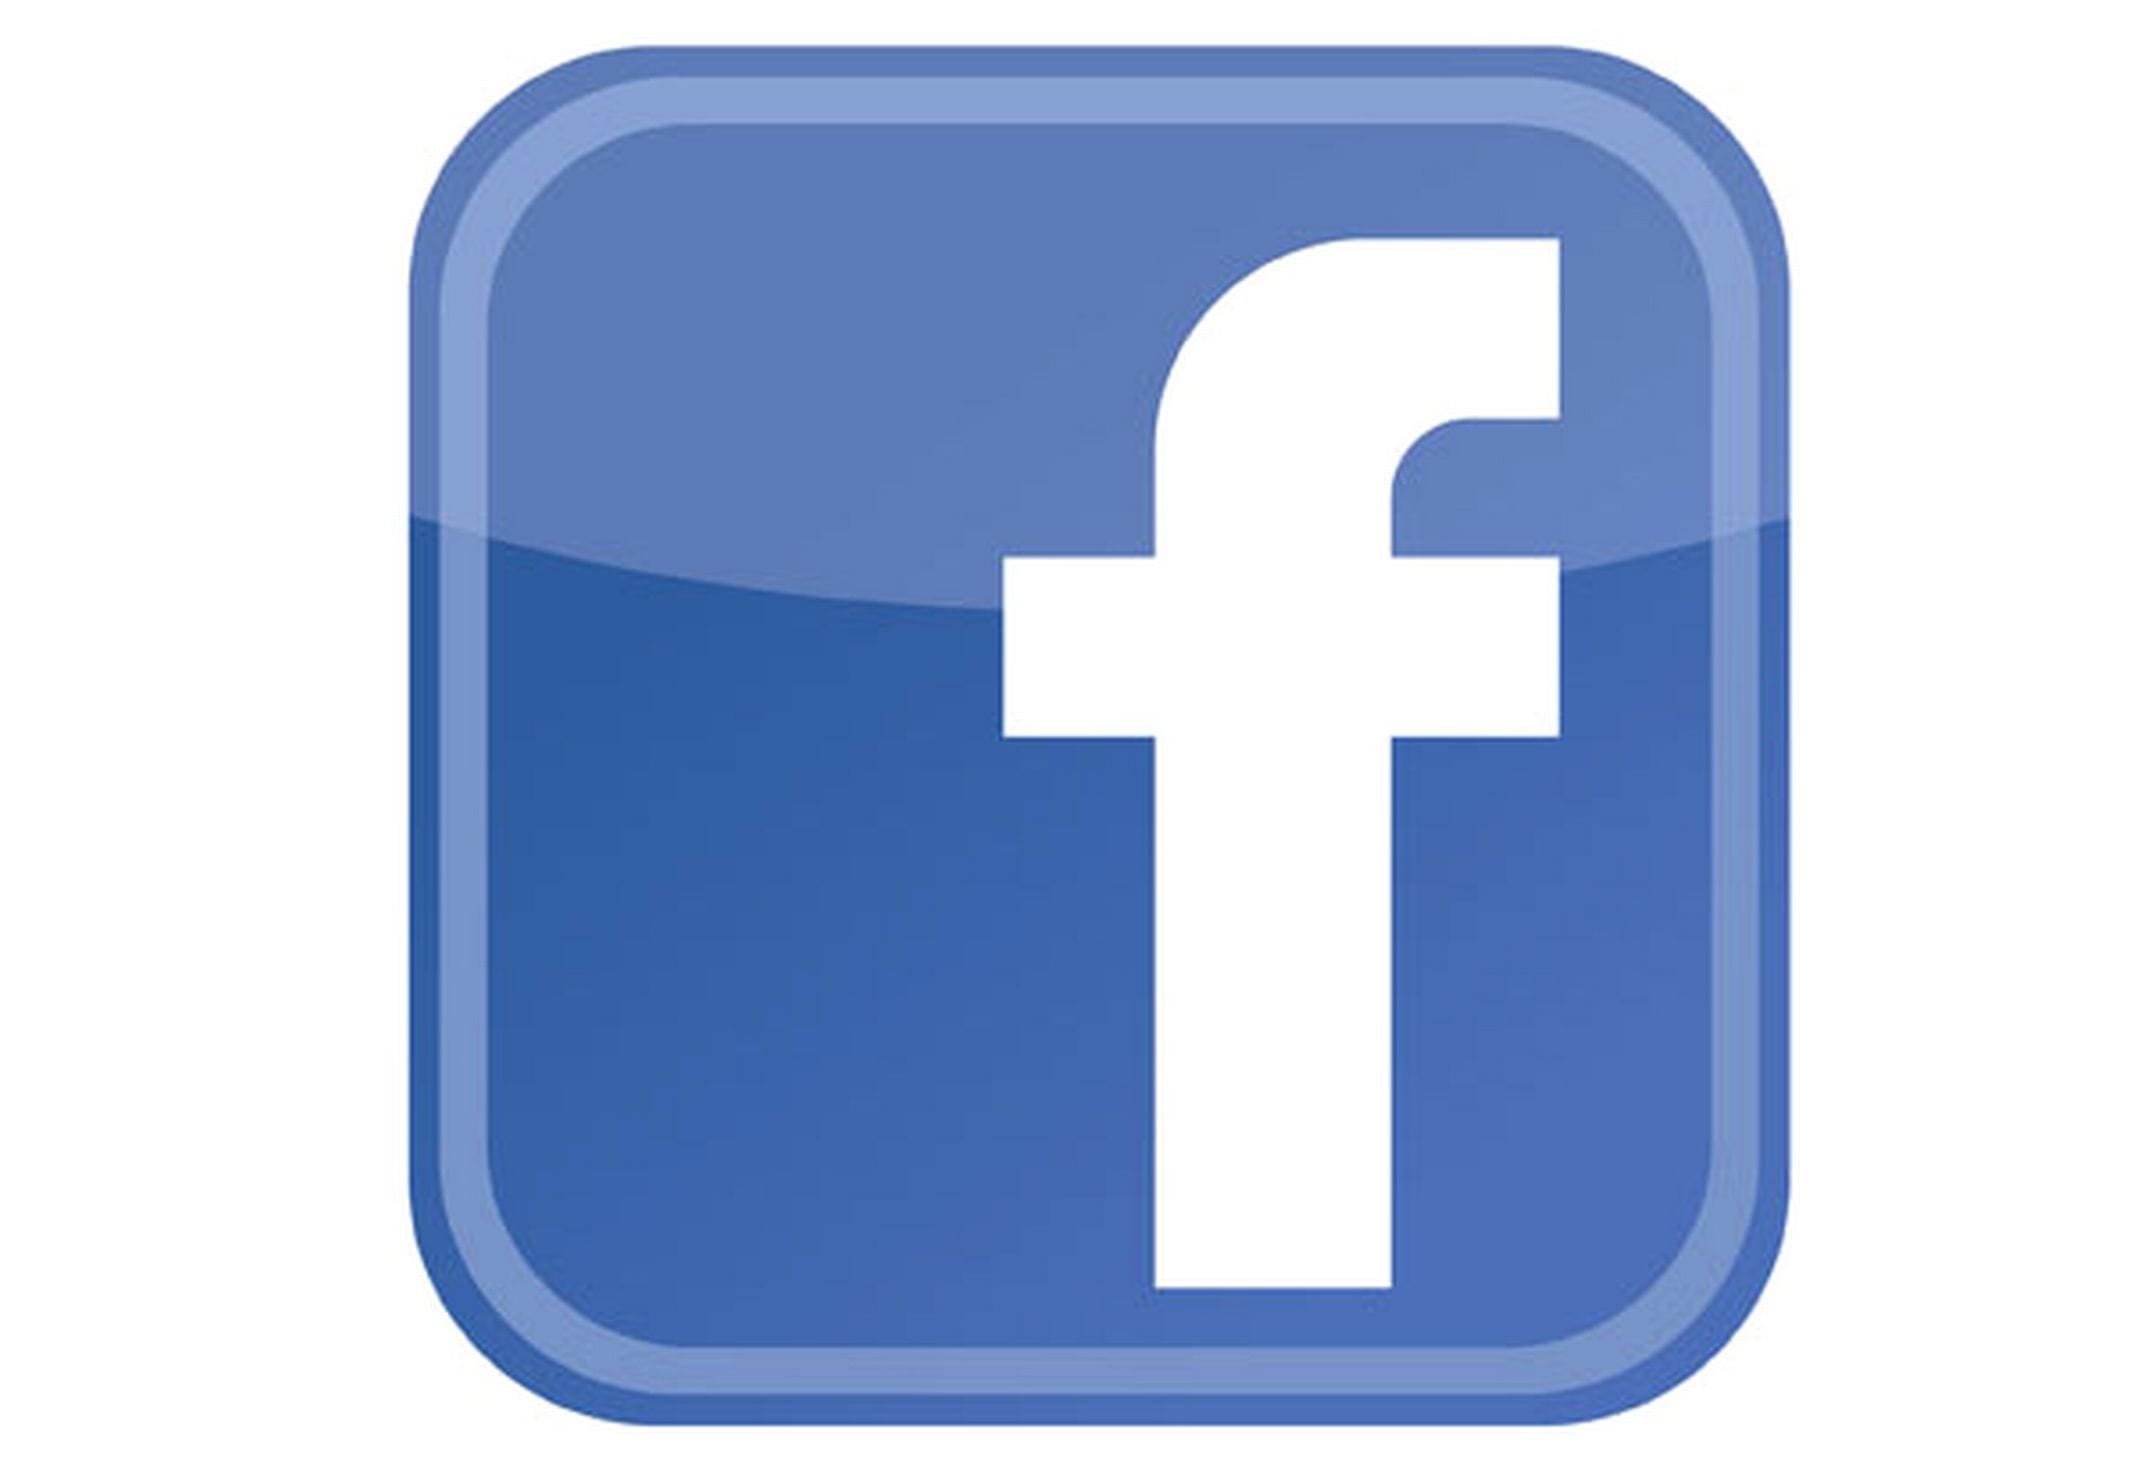 Join our popular Facebook community group!